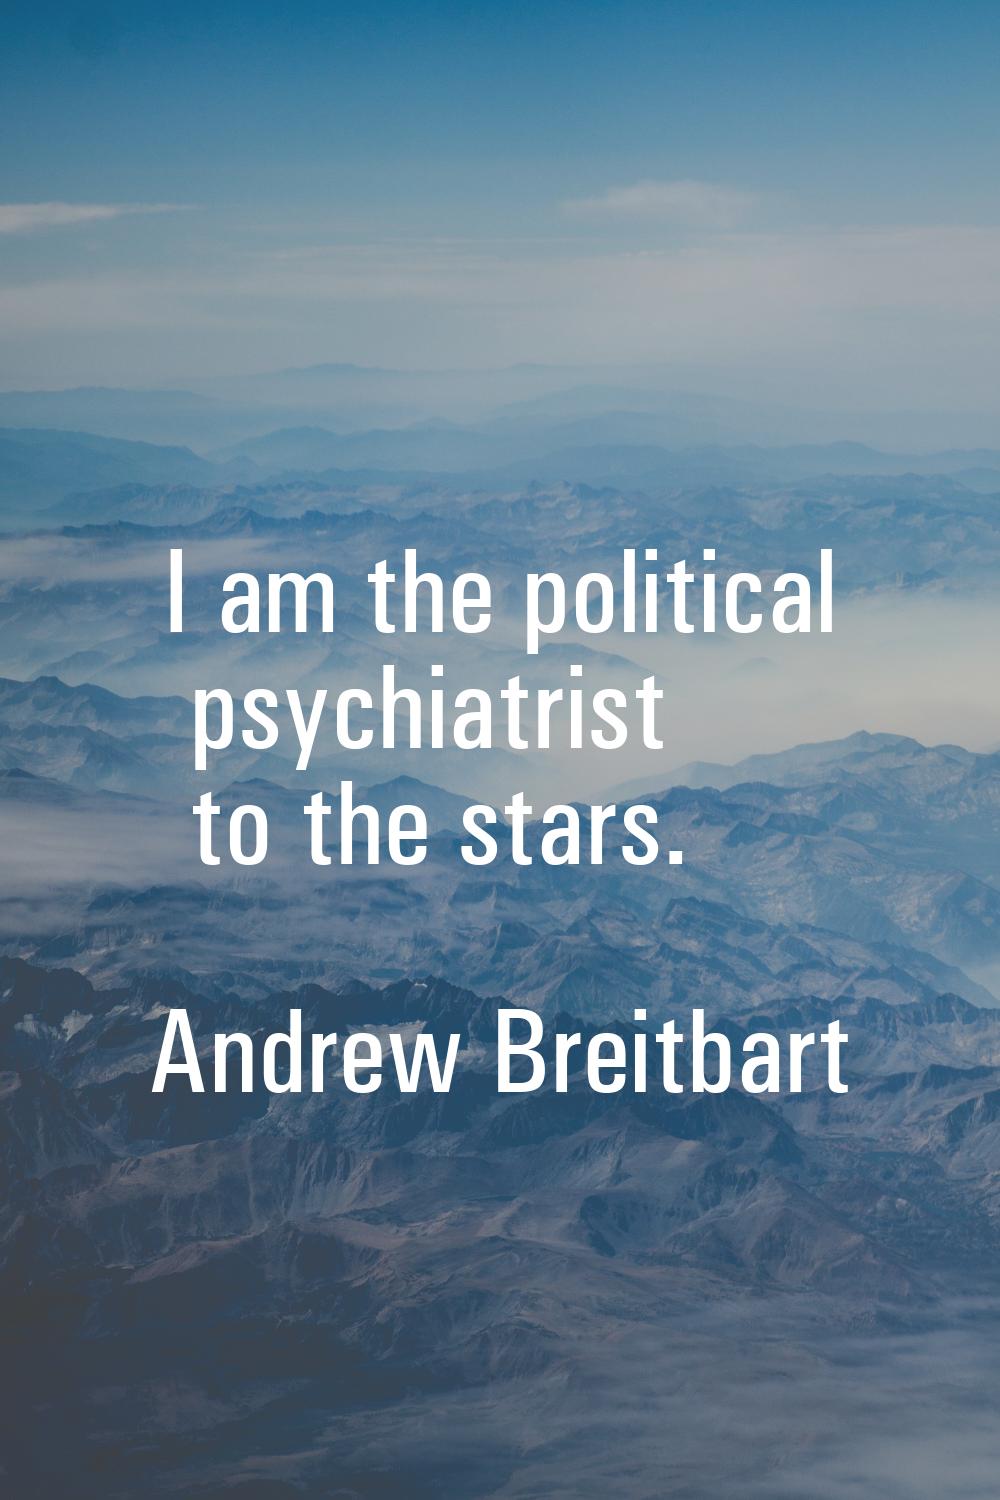 I am the political psychiatrist to the stars.